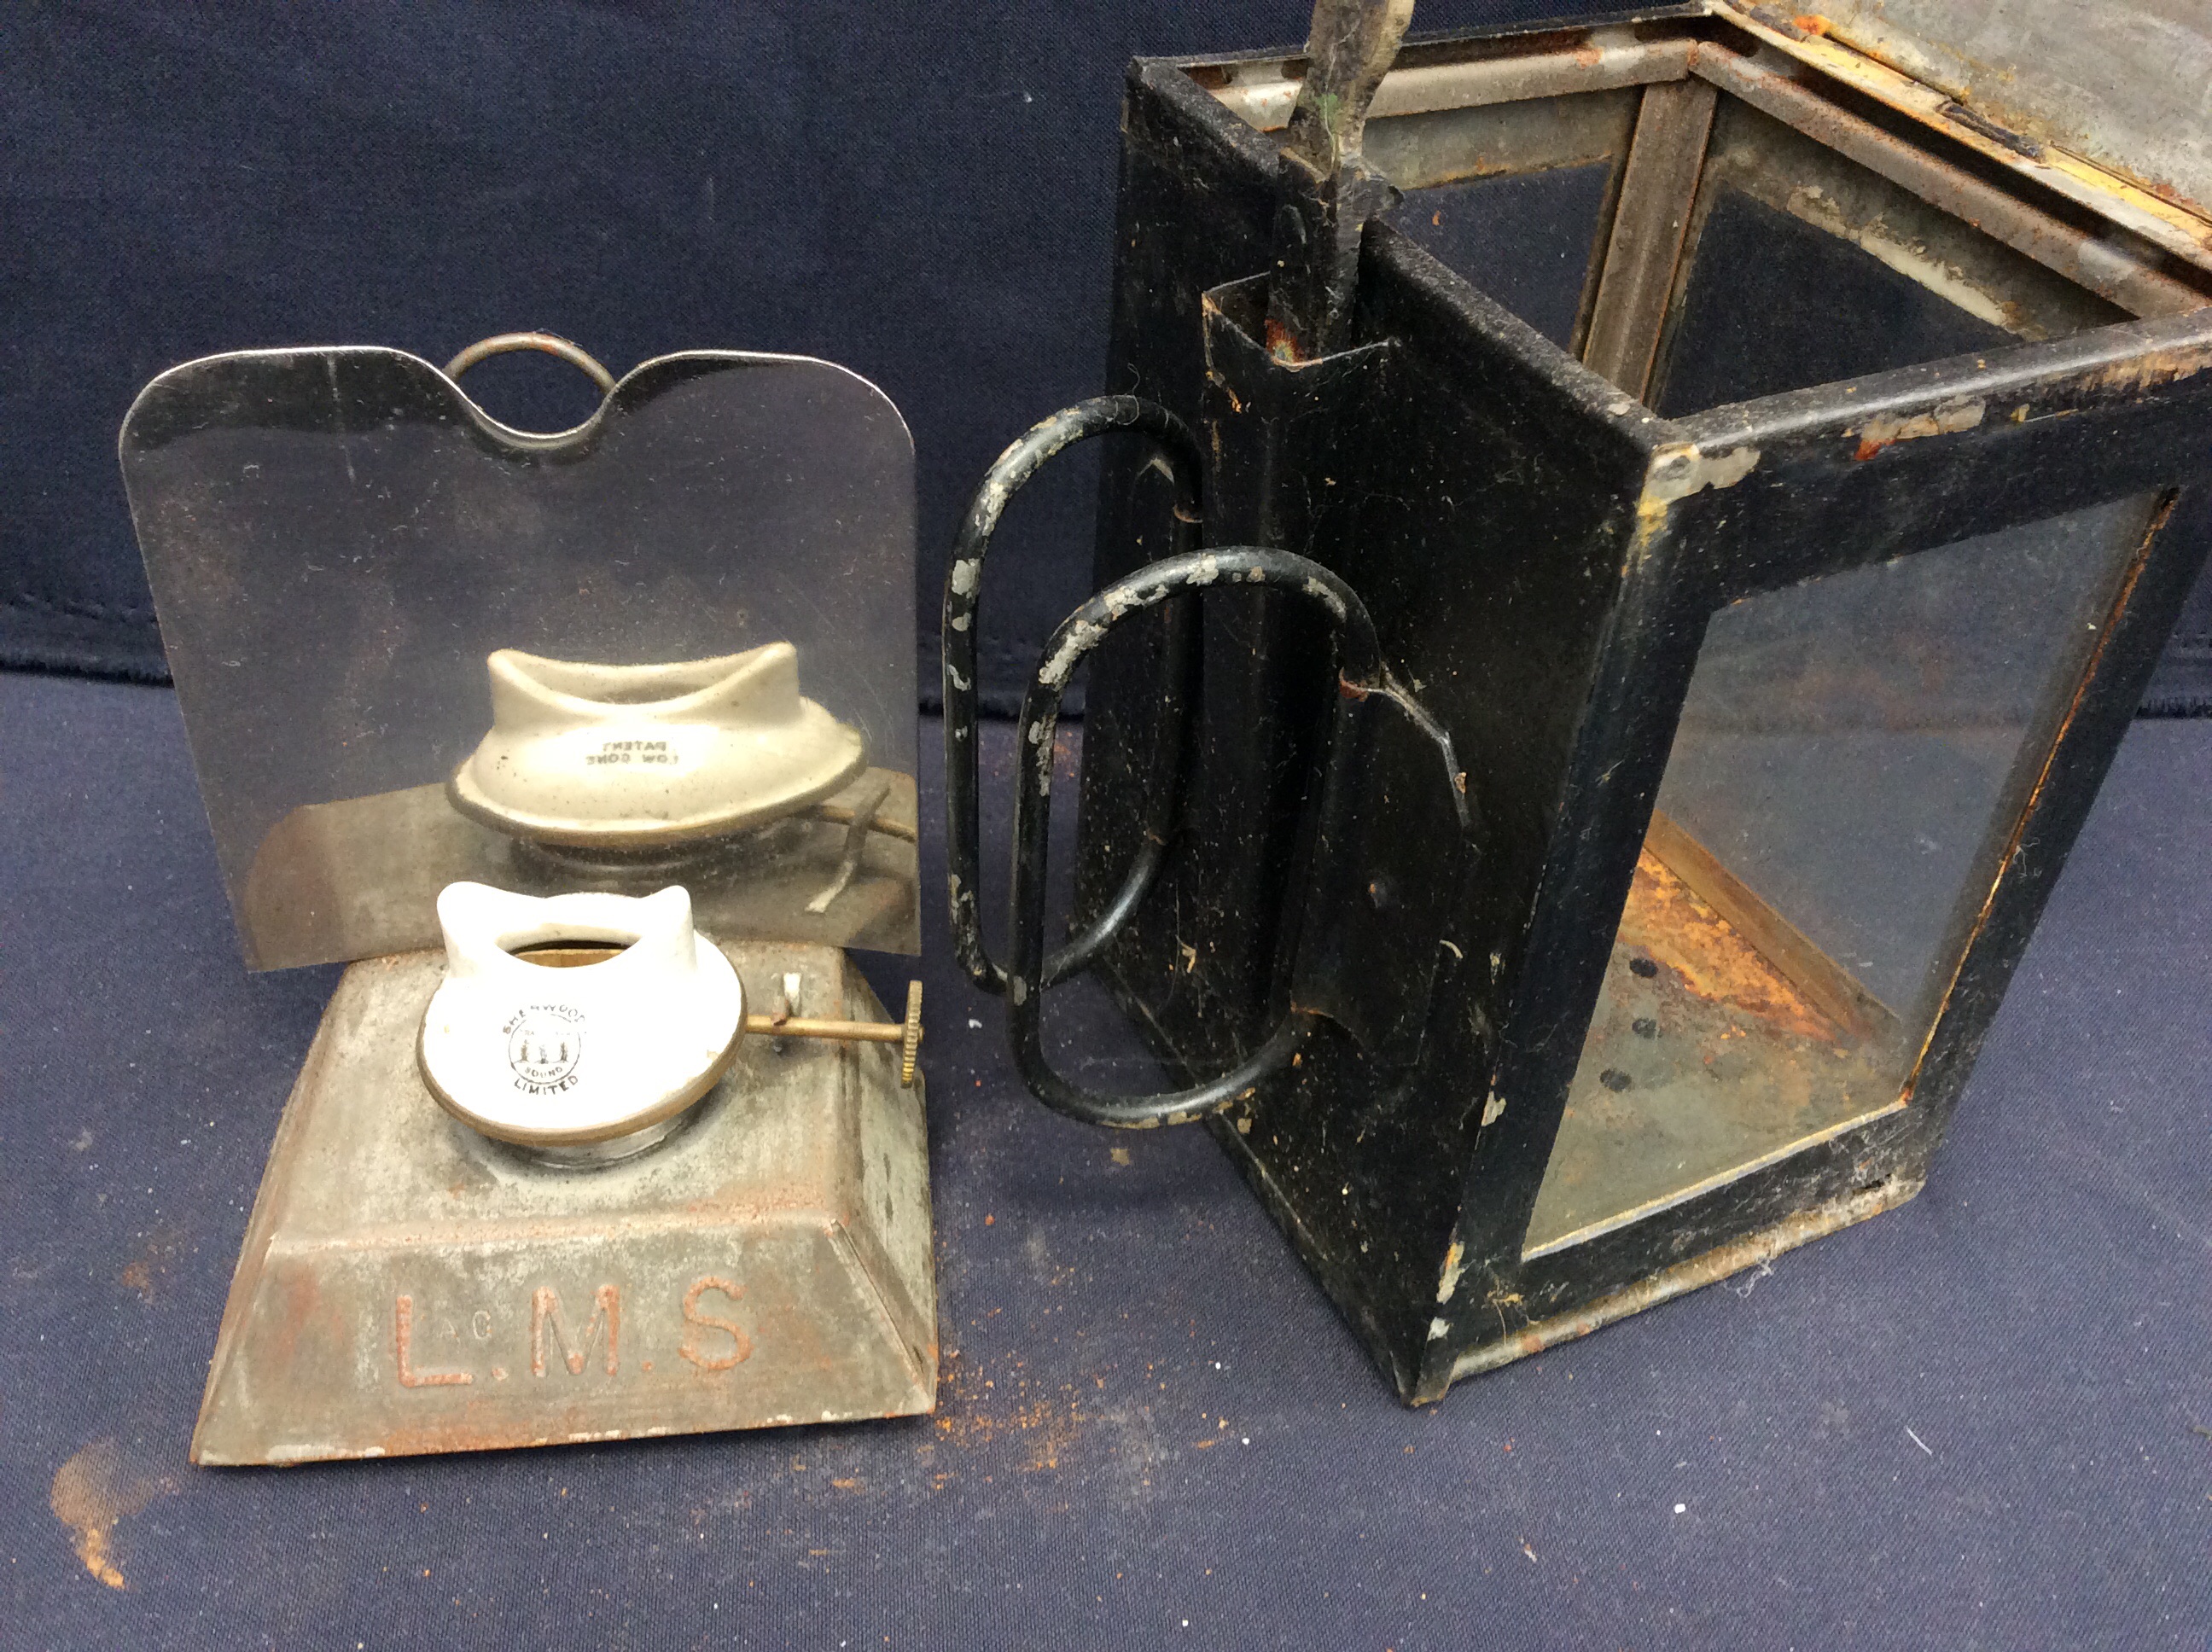 3 railway lamps including an LMS example with ceramic Sherwoods Limited burner - Image 7 of 8